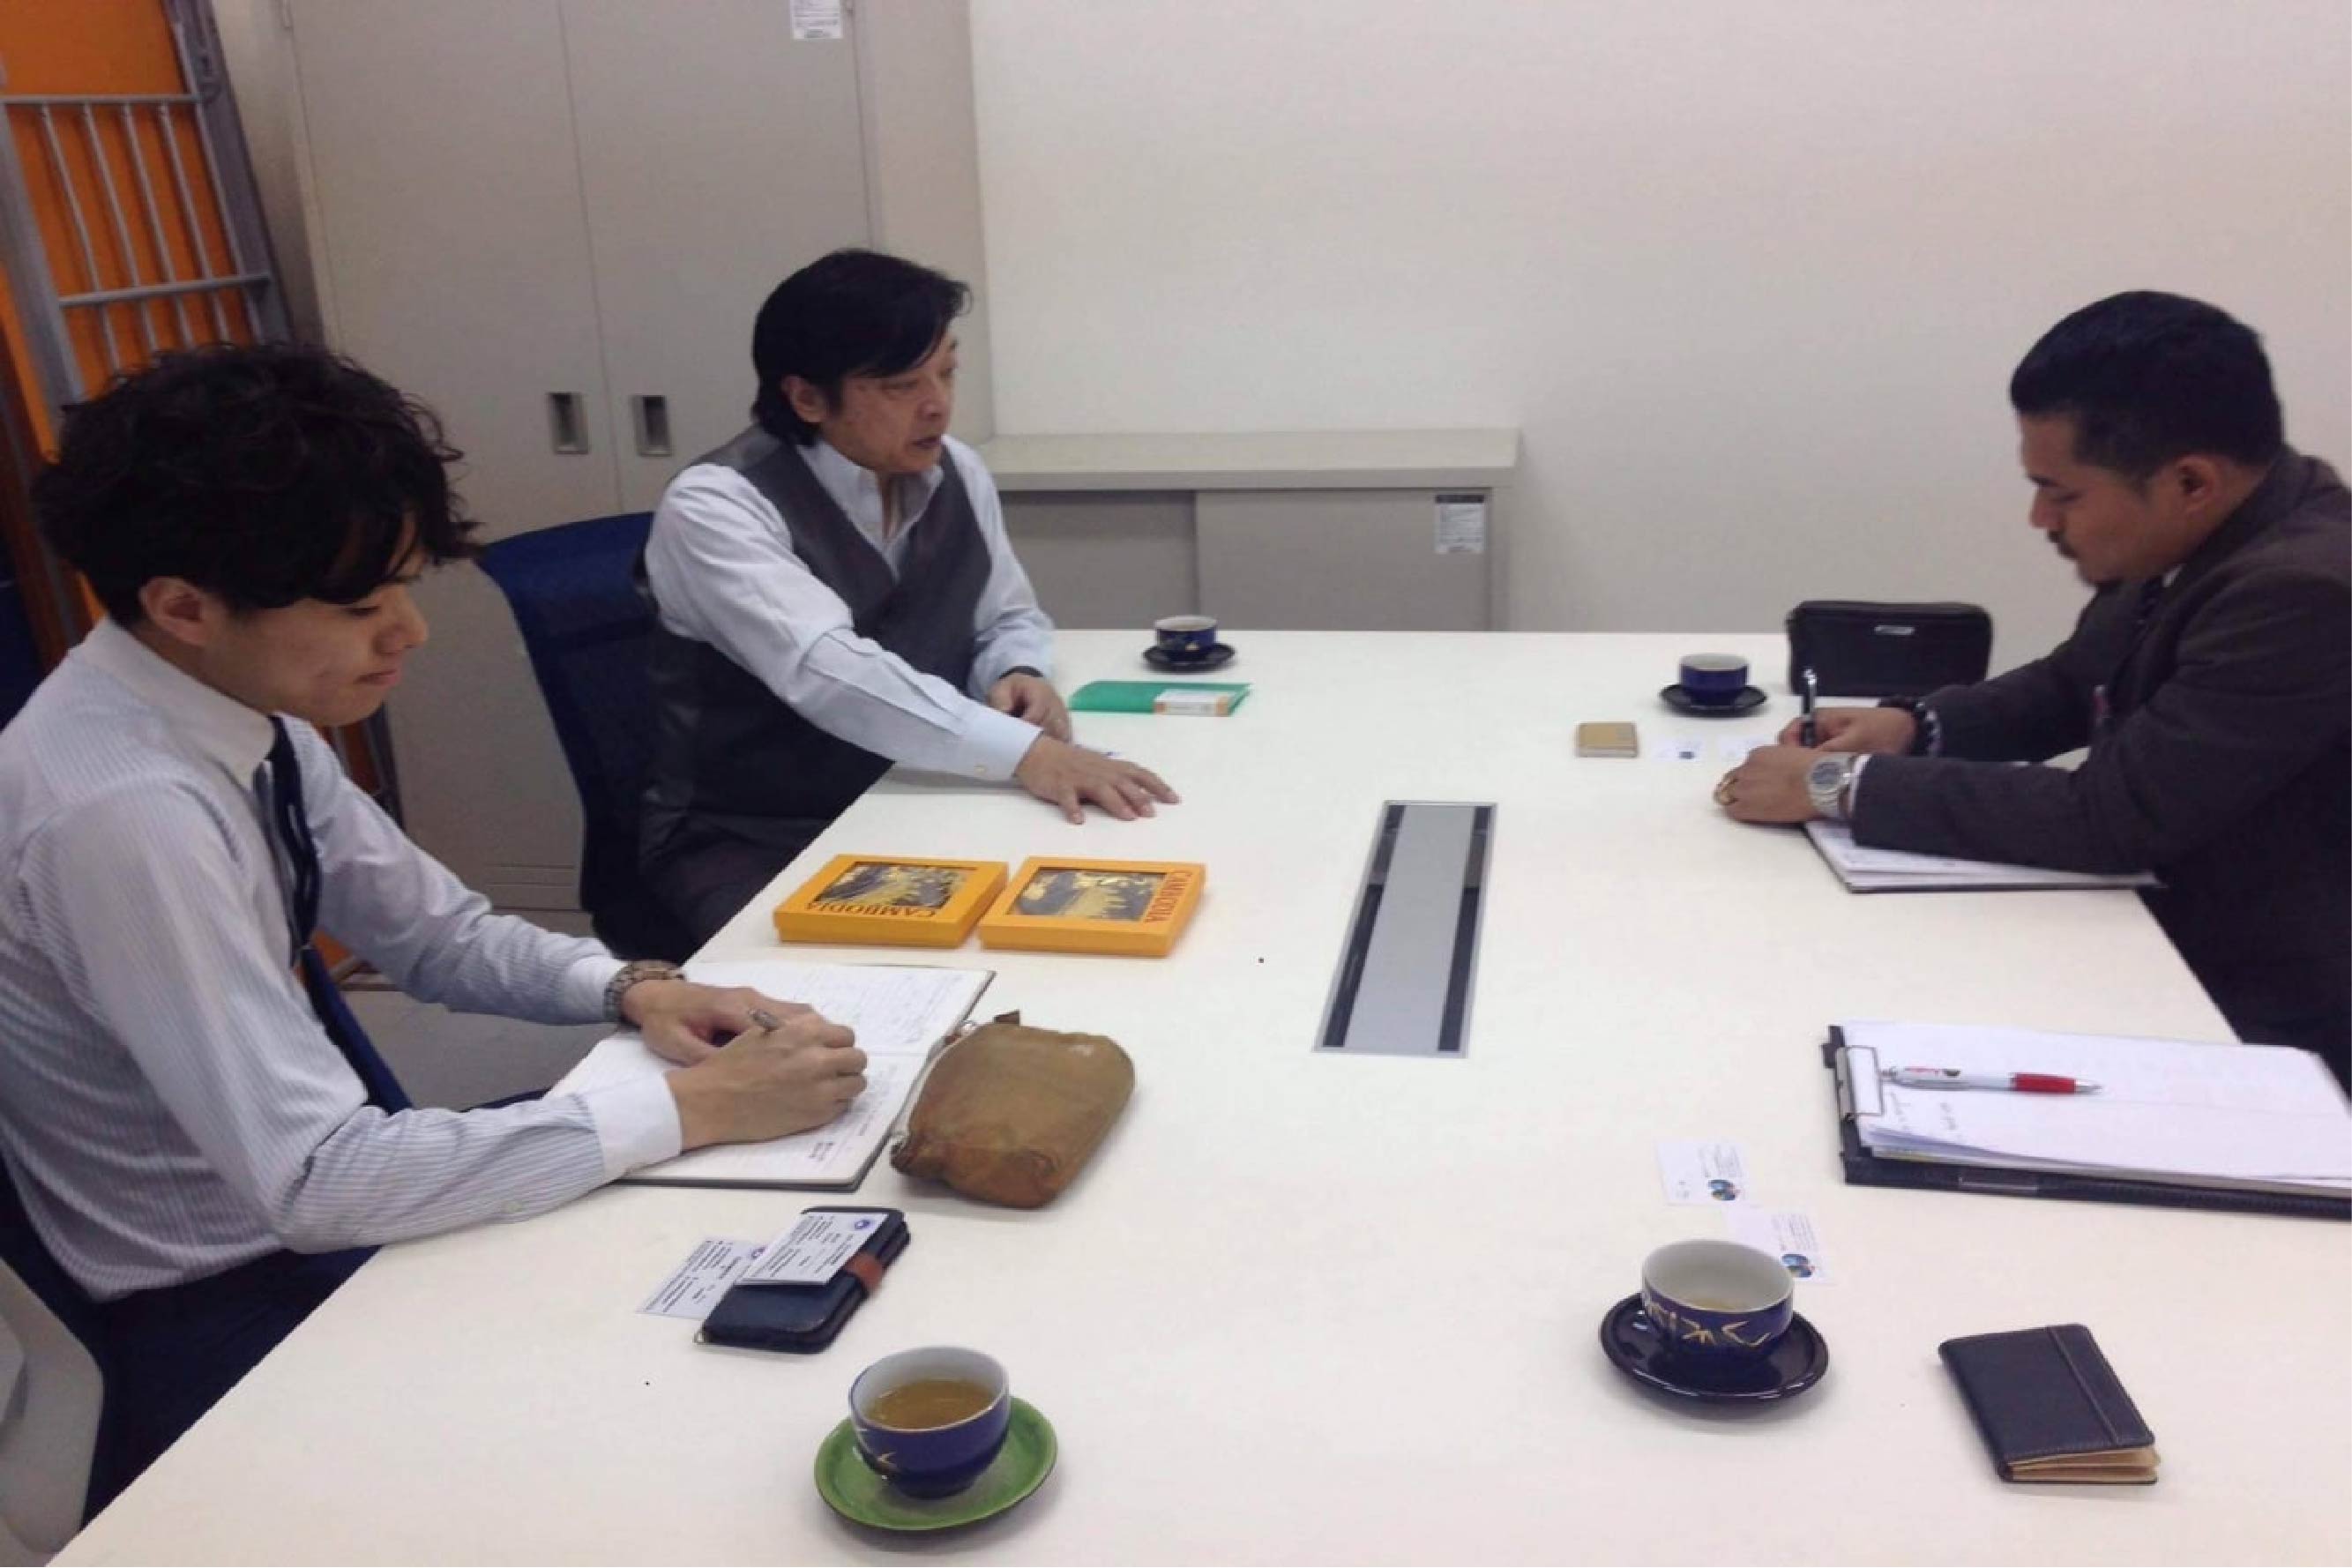 Meeting with Other University in Tokyo